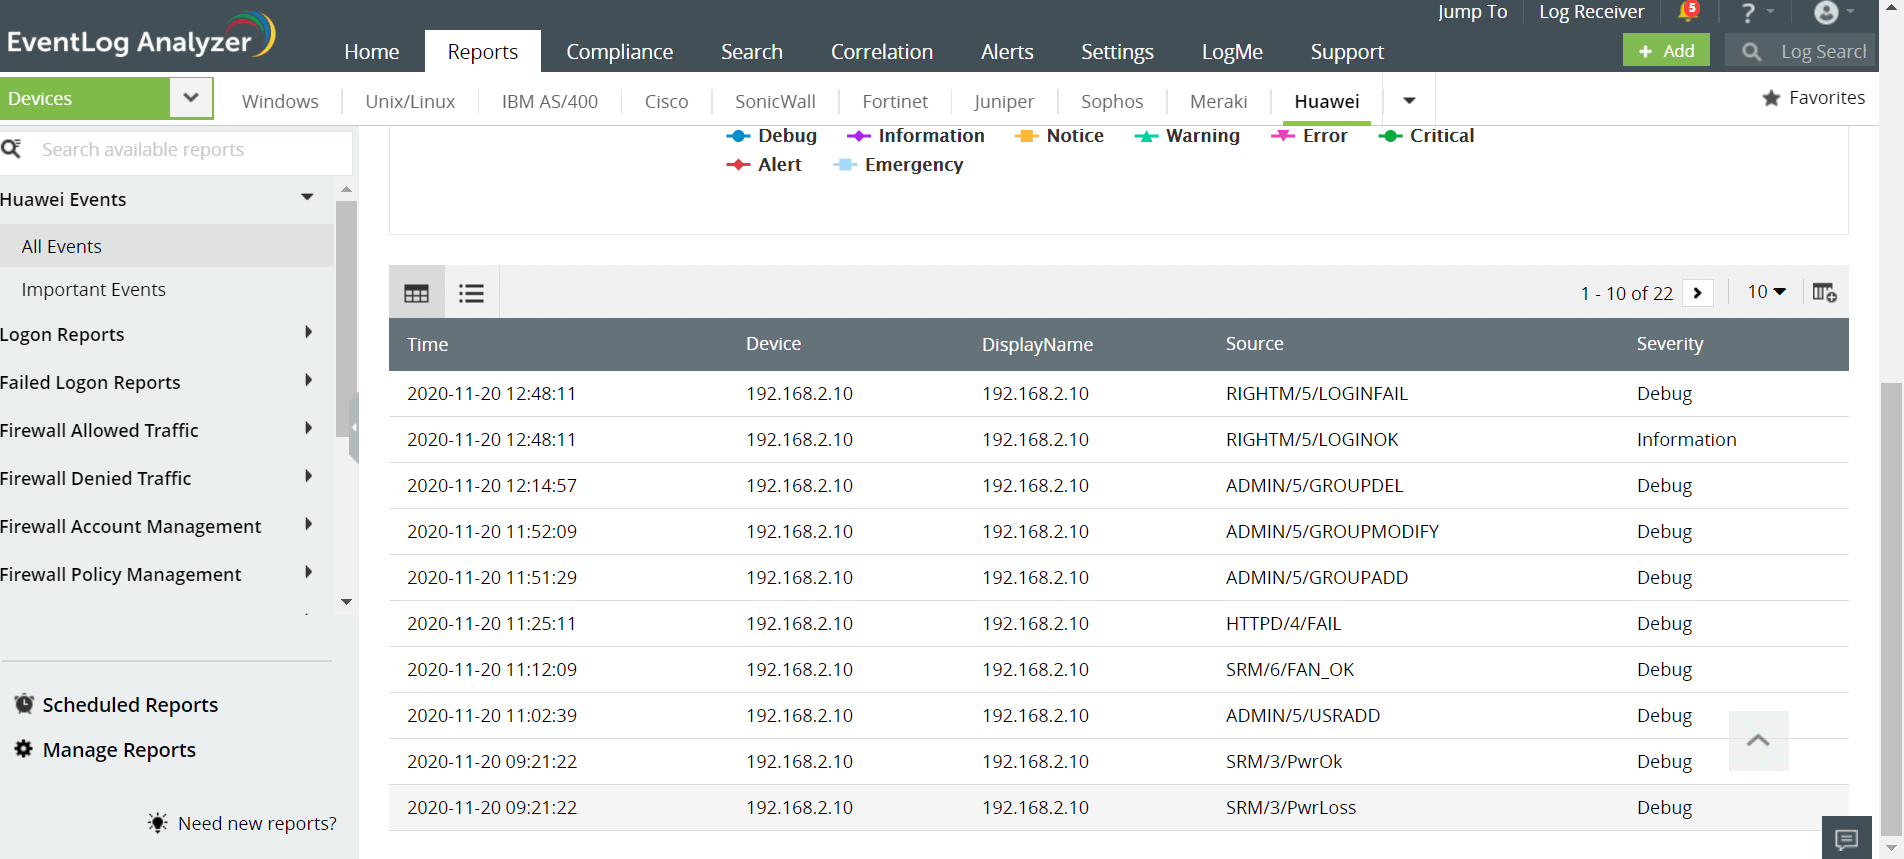 Reports for Huawei Devices